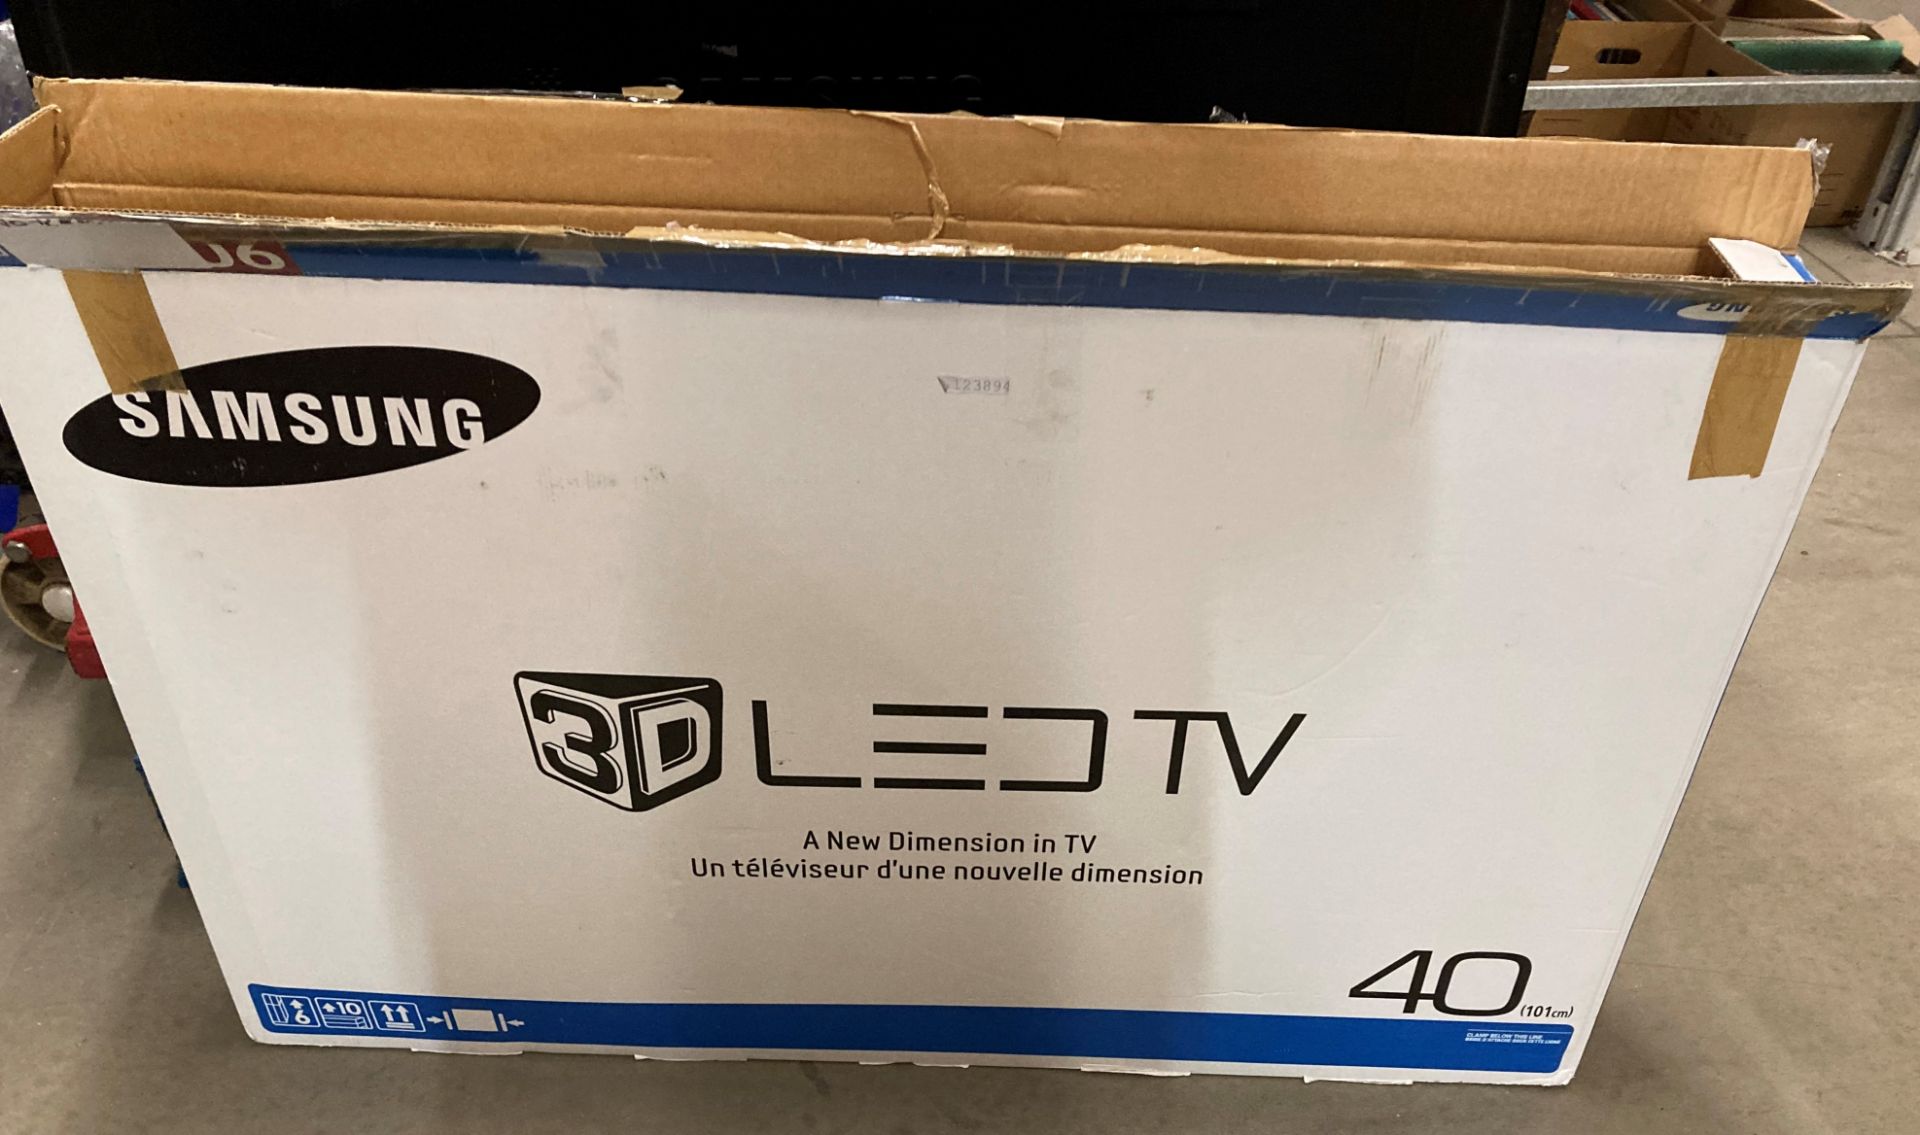 Samsung 40" 3D LED TV model UE40C7000WK complete with power lead (no remote) (E08 FLOOR) - Image 2 of 3